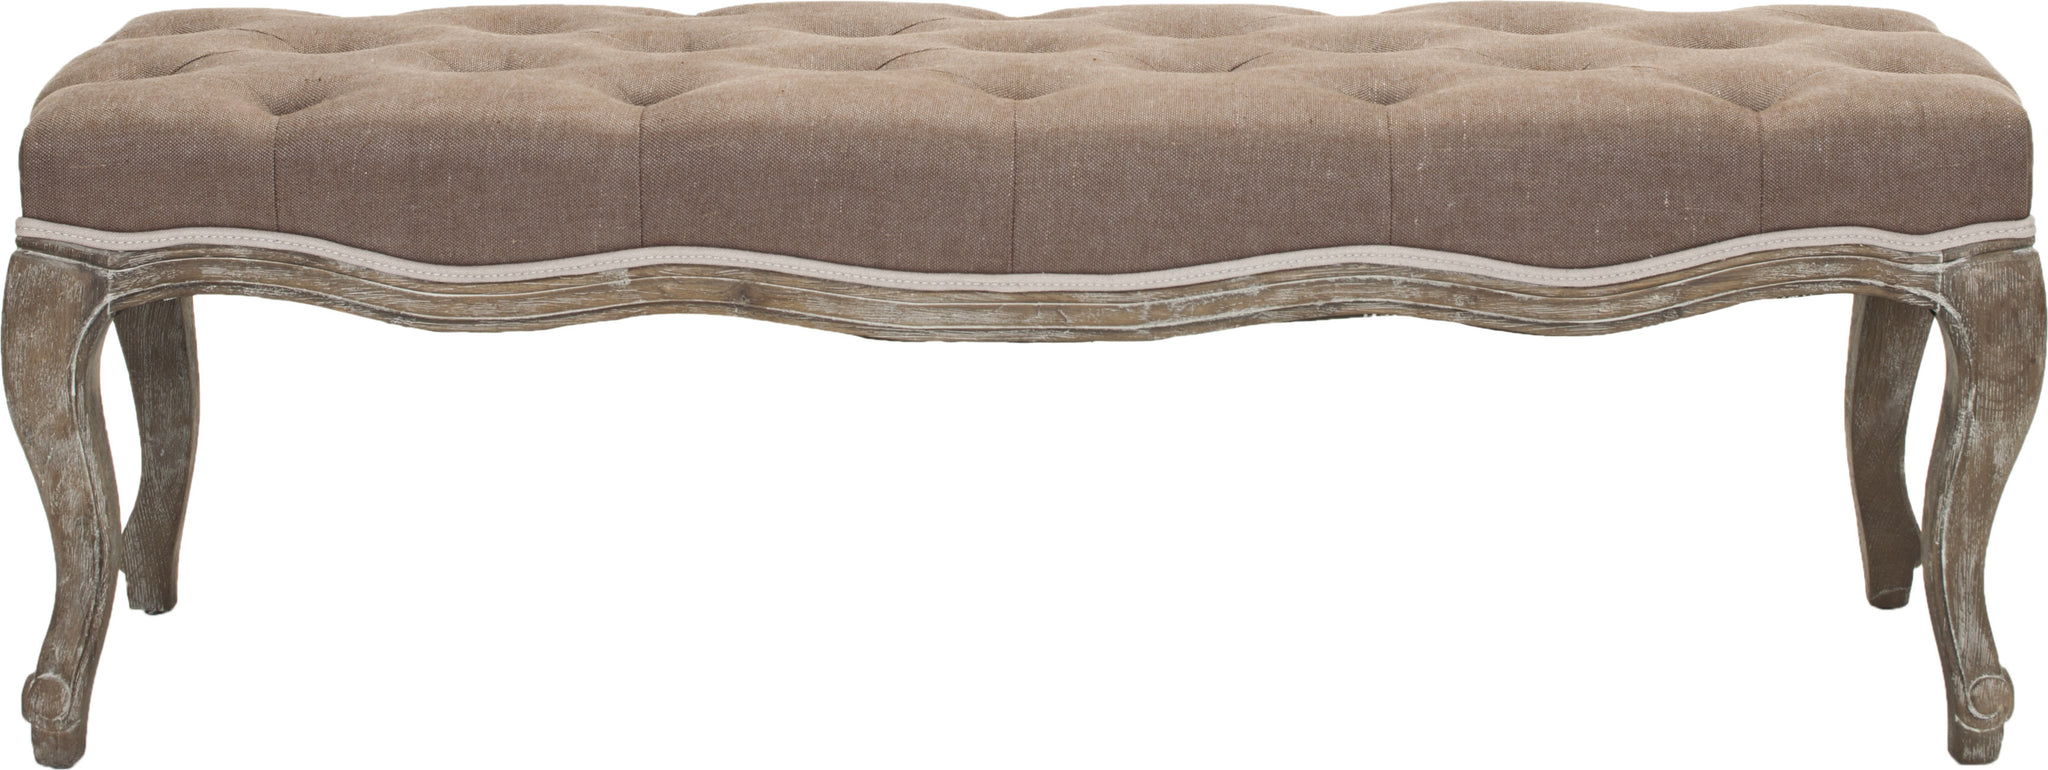 Safavieh Ramsey Bench Warm Brown and Pickled Oak Finish Furniture main image